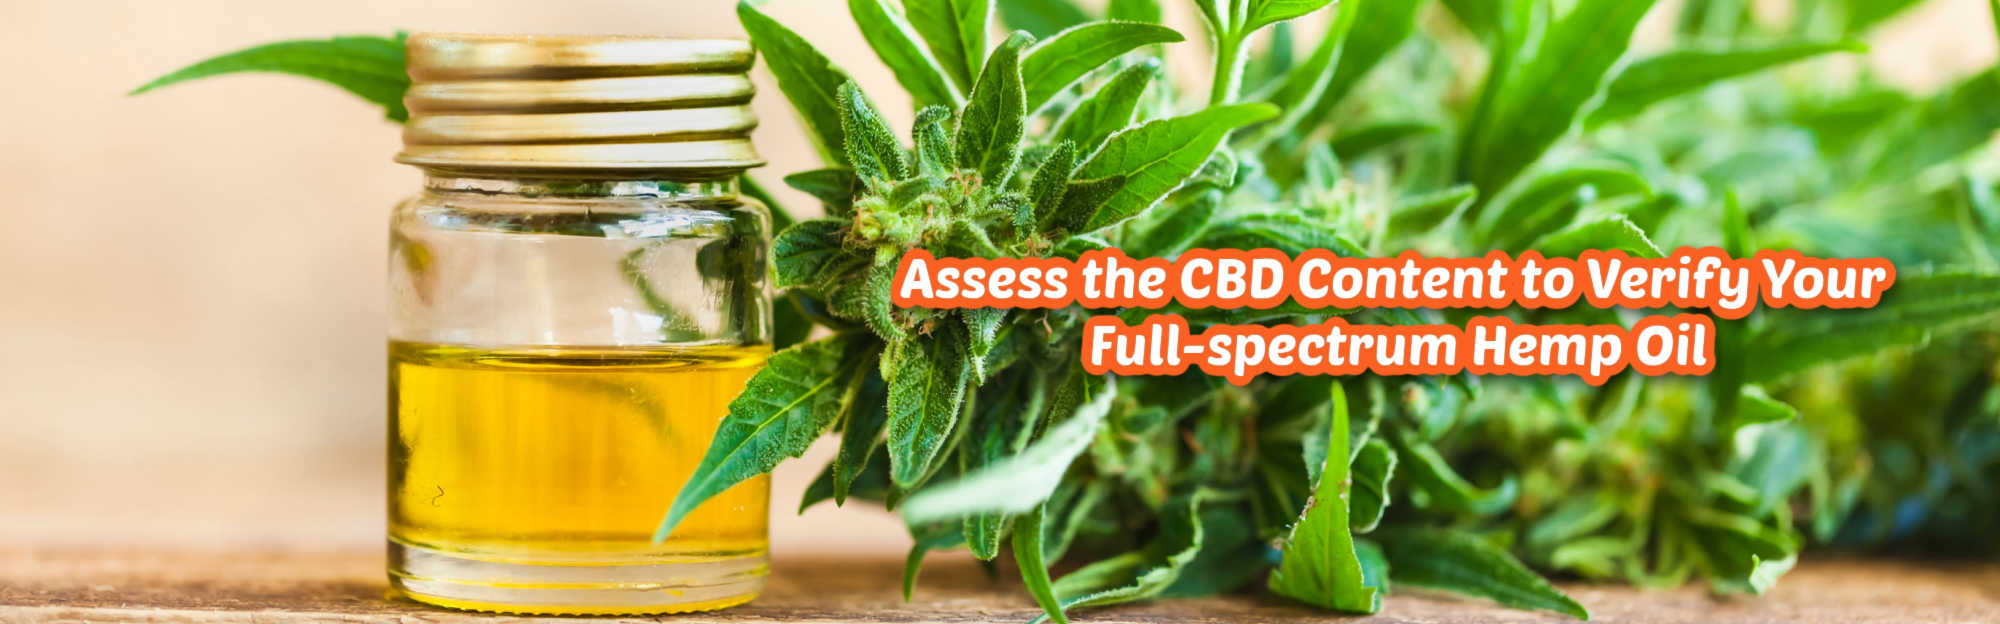 image of assess the cbd content to verify your full spectrum cbd oil